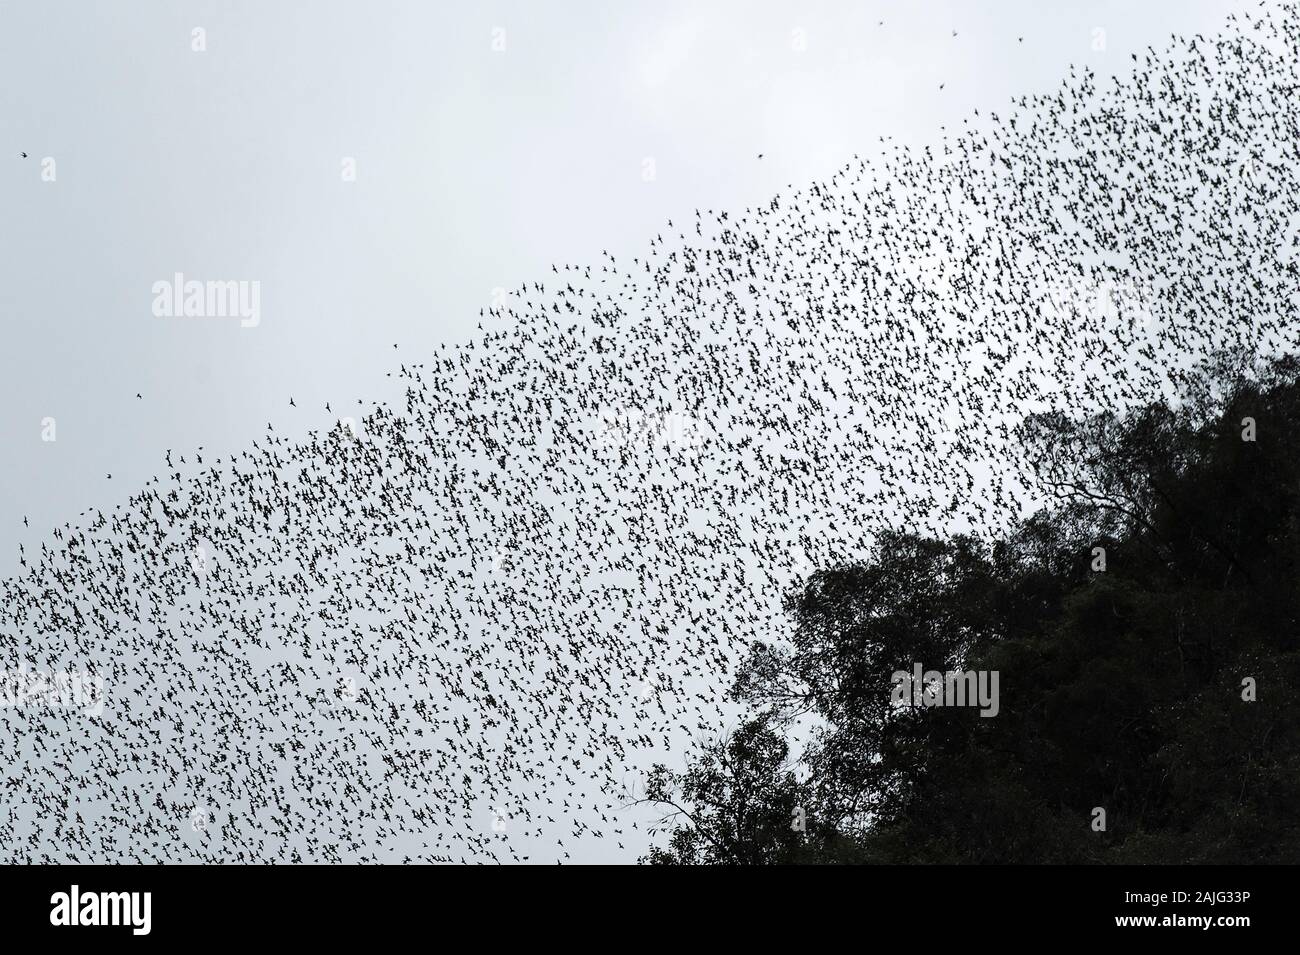 Millions of bats swarming out from the Deer Cave to head to their feeding grounds, Gunung Mulu National Park, Sarawak, Borneo, Malaysia Stock Photo